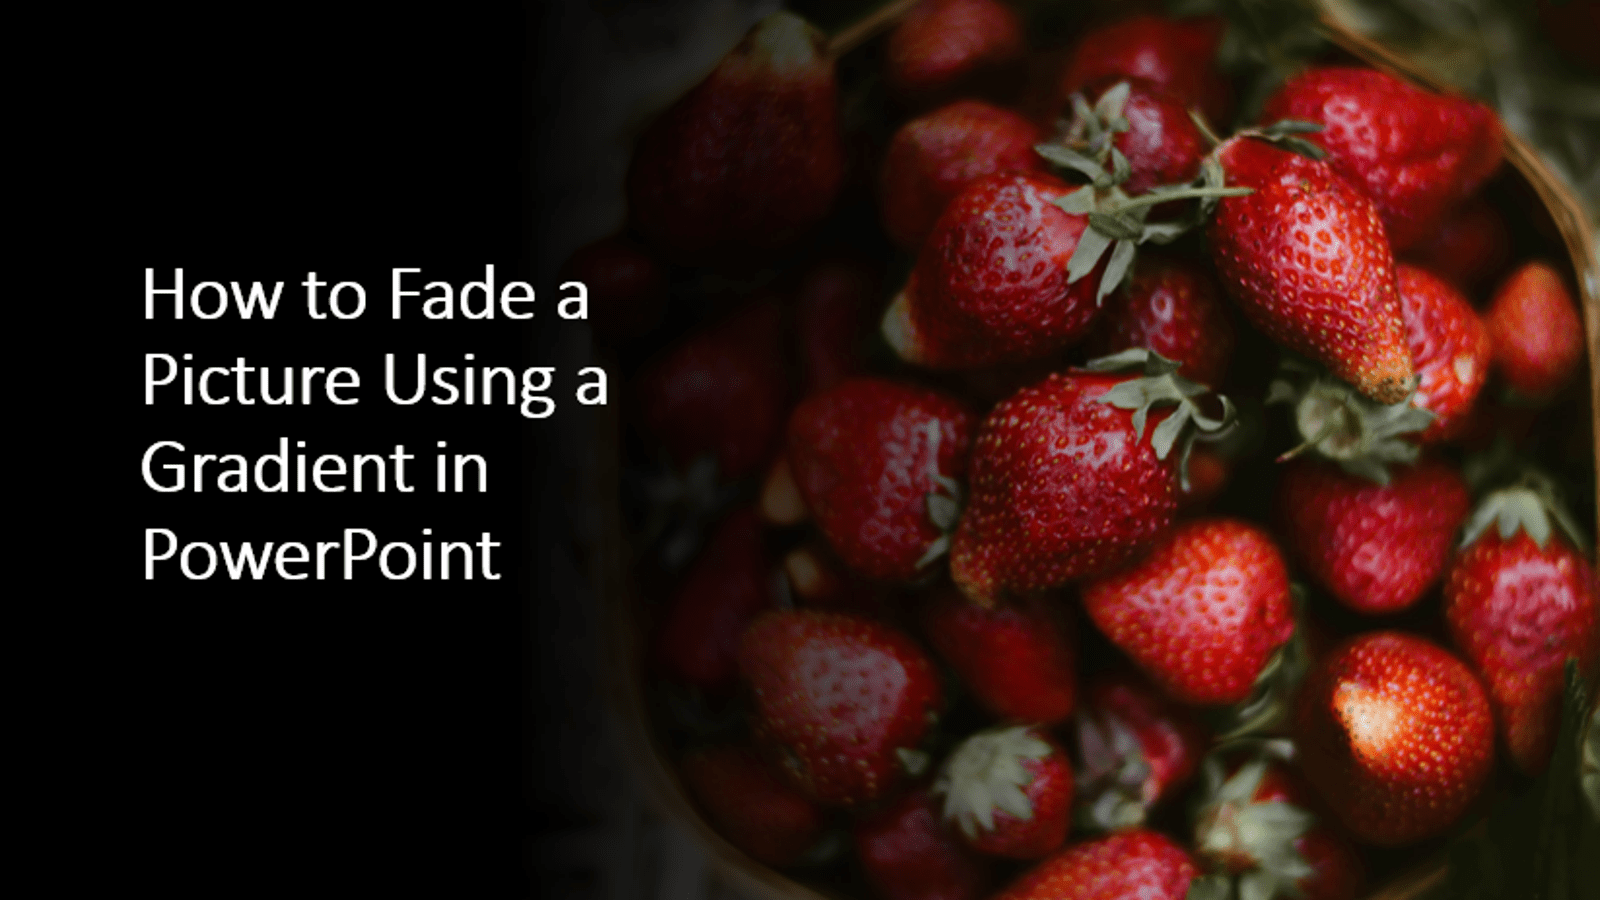 How to Fade a Picture or Part of a Picture in PowerPoint (Using a Gradient)